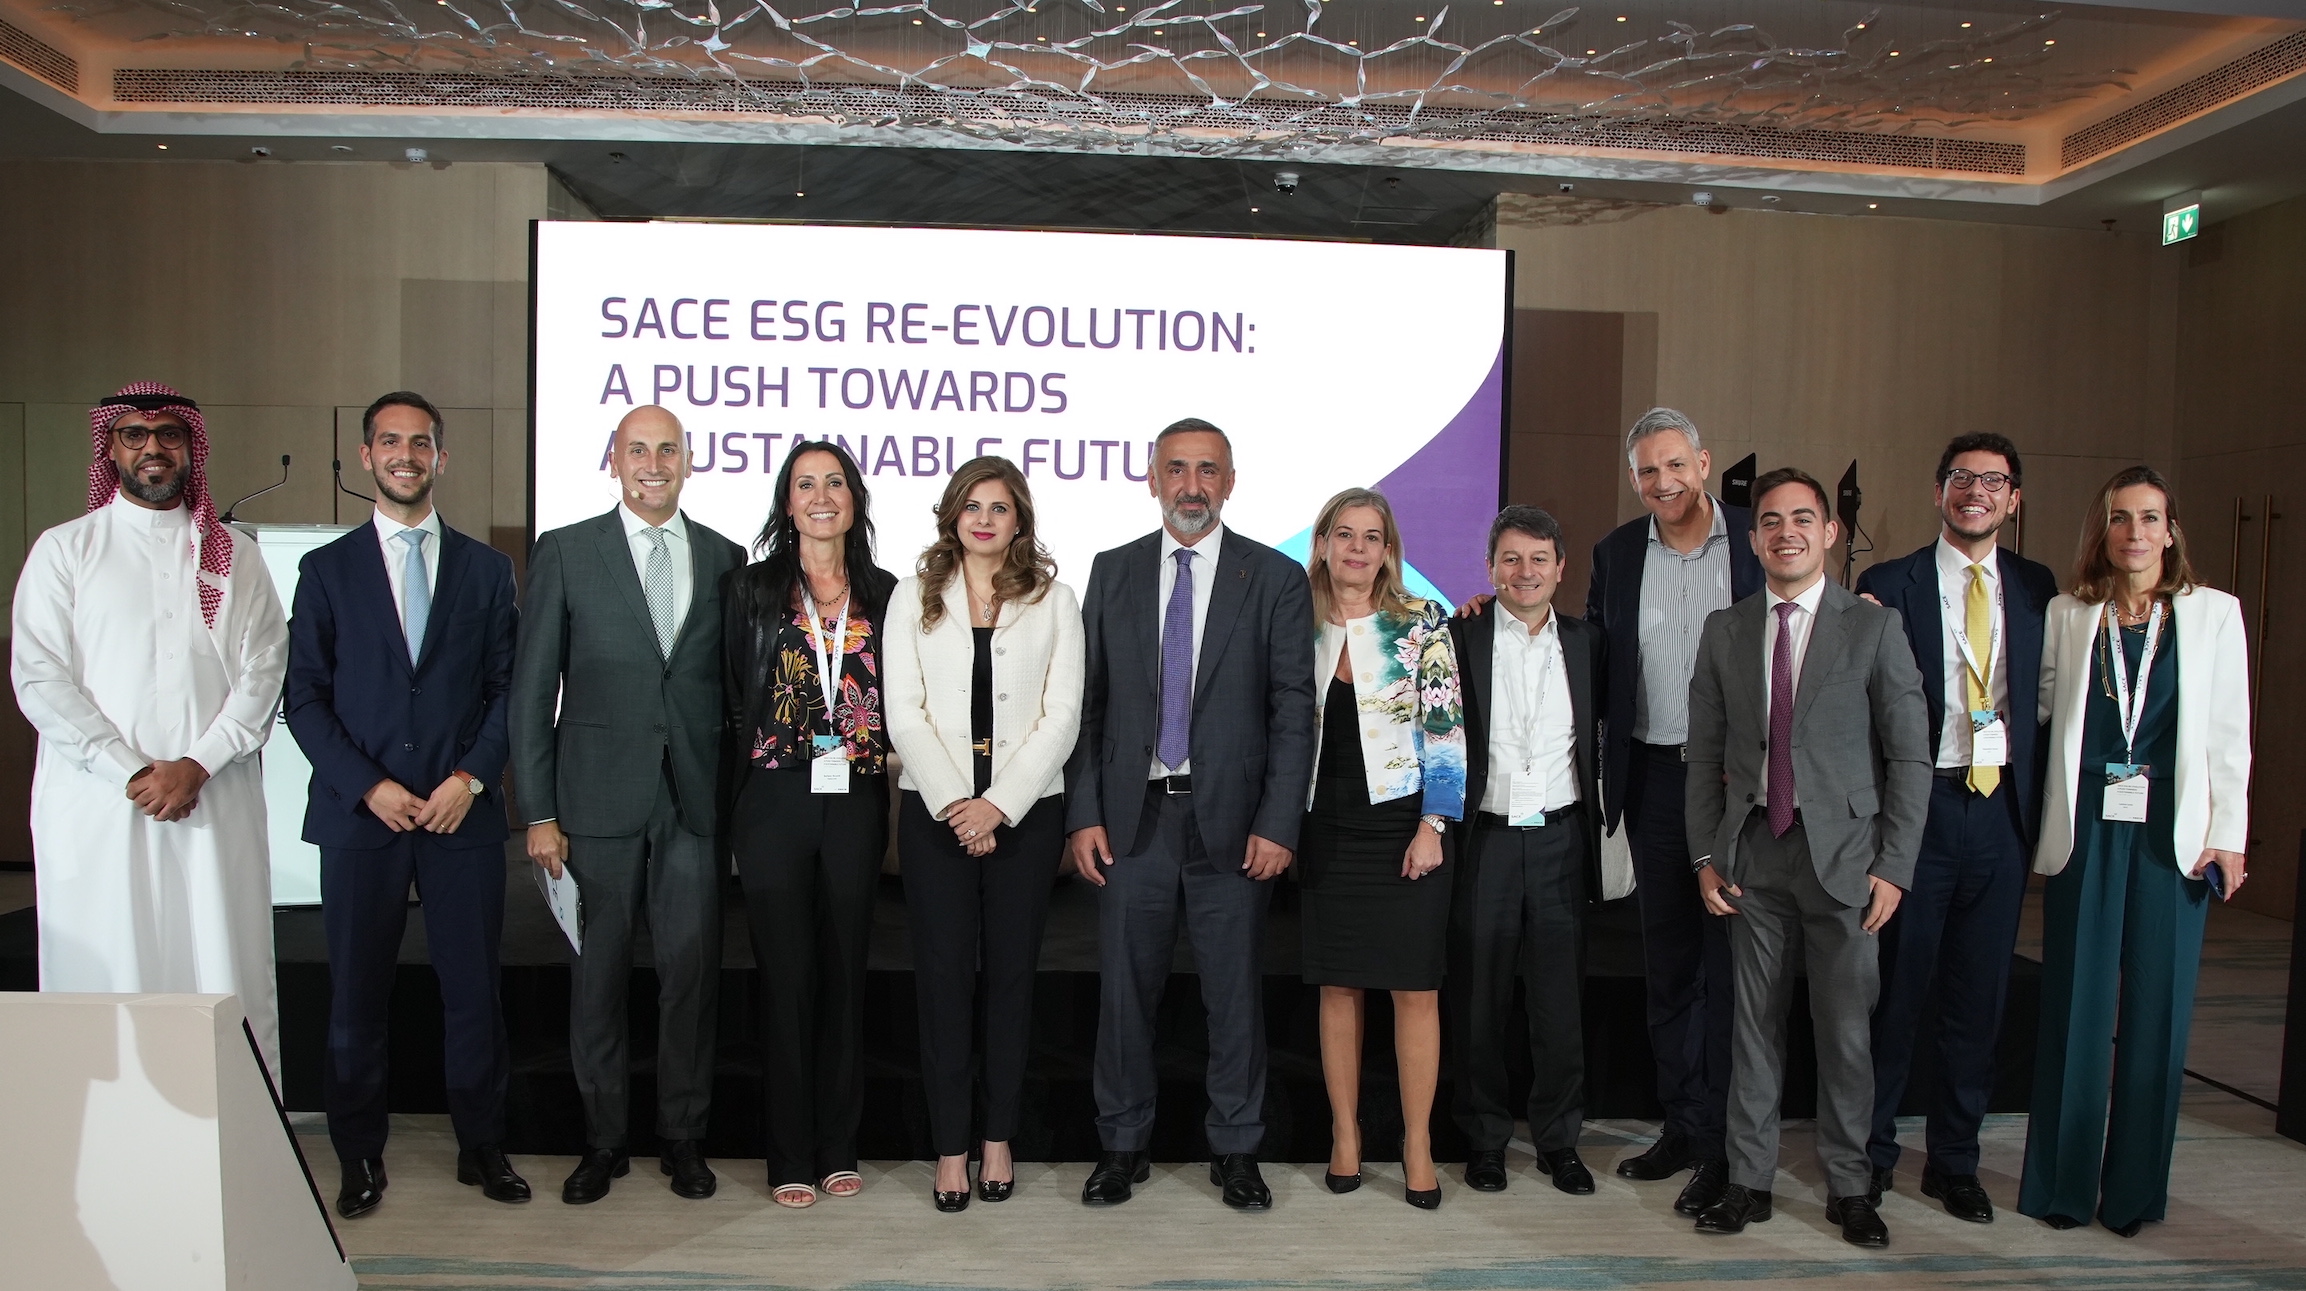 SACE ESG RE-EVOLUTION: A PUSH TOWARDS A SUSTAINABLE FUTURE Extra Content proposal for the GCC Media in view of the SACE corporate event